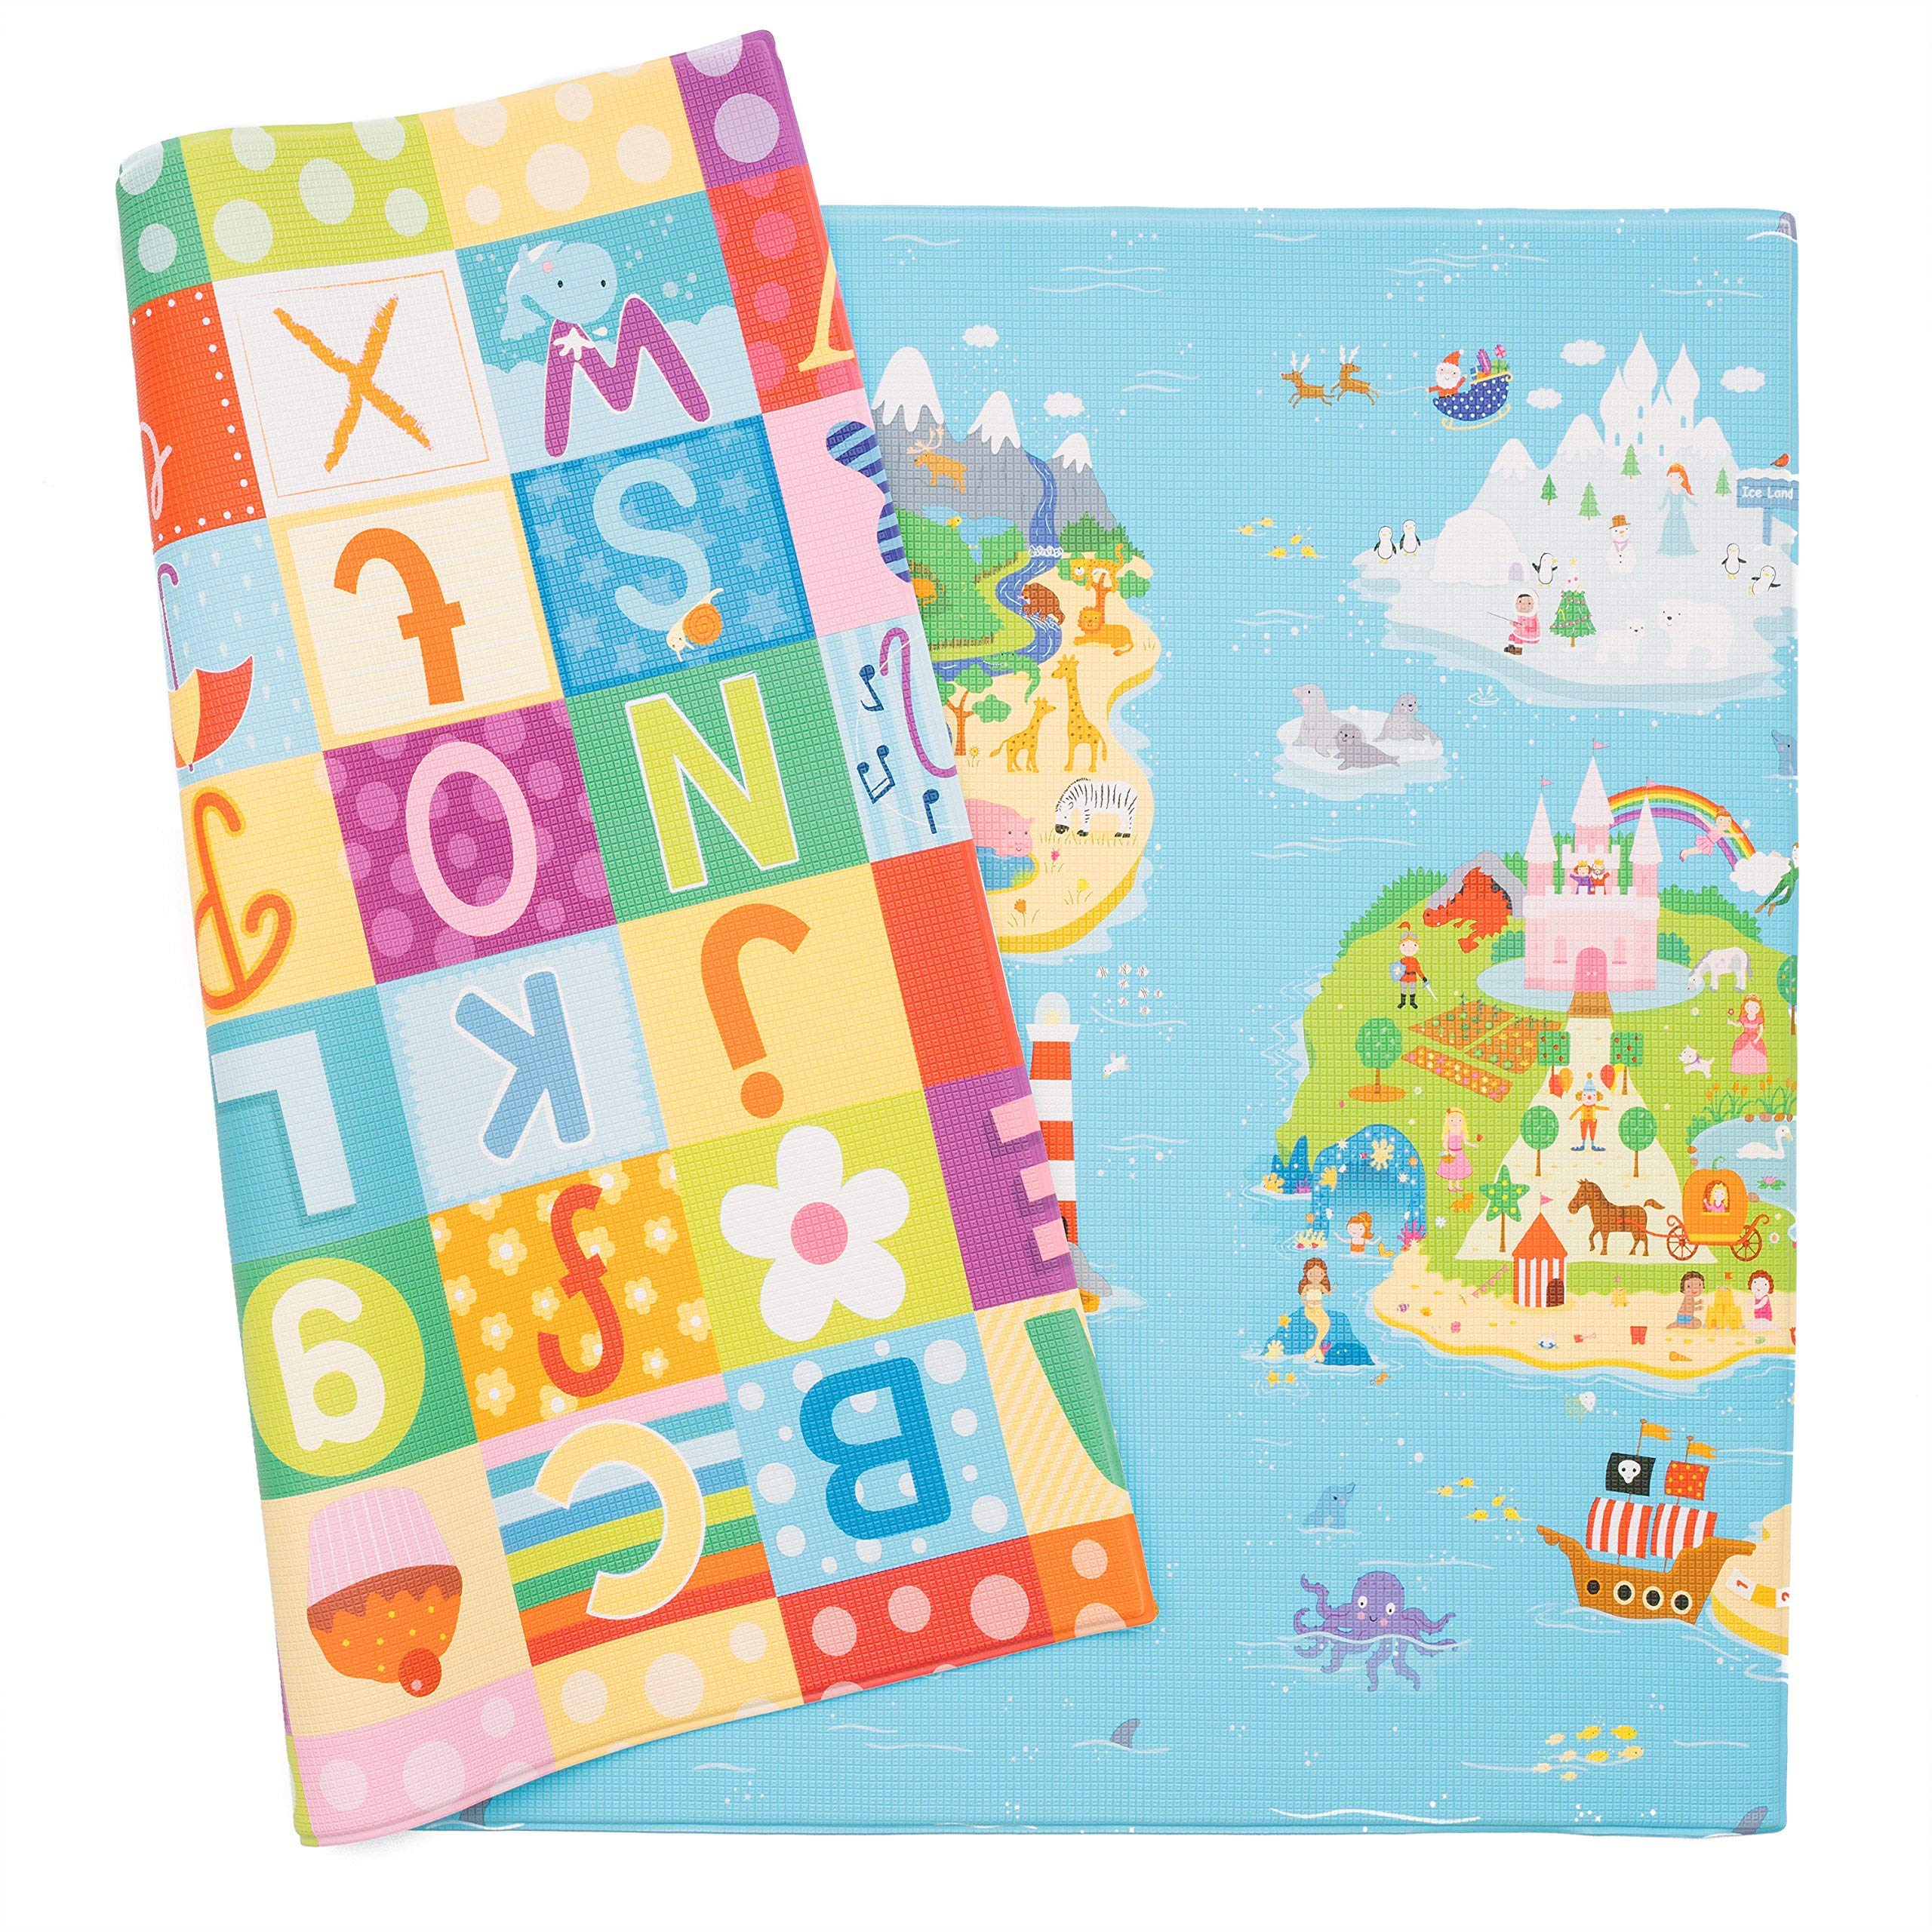 Baby Care Play Mat - Haute Collection (Large, Magical Island)